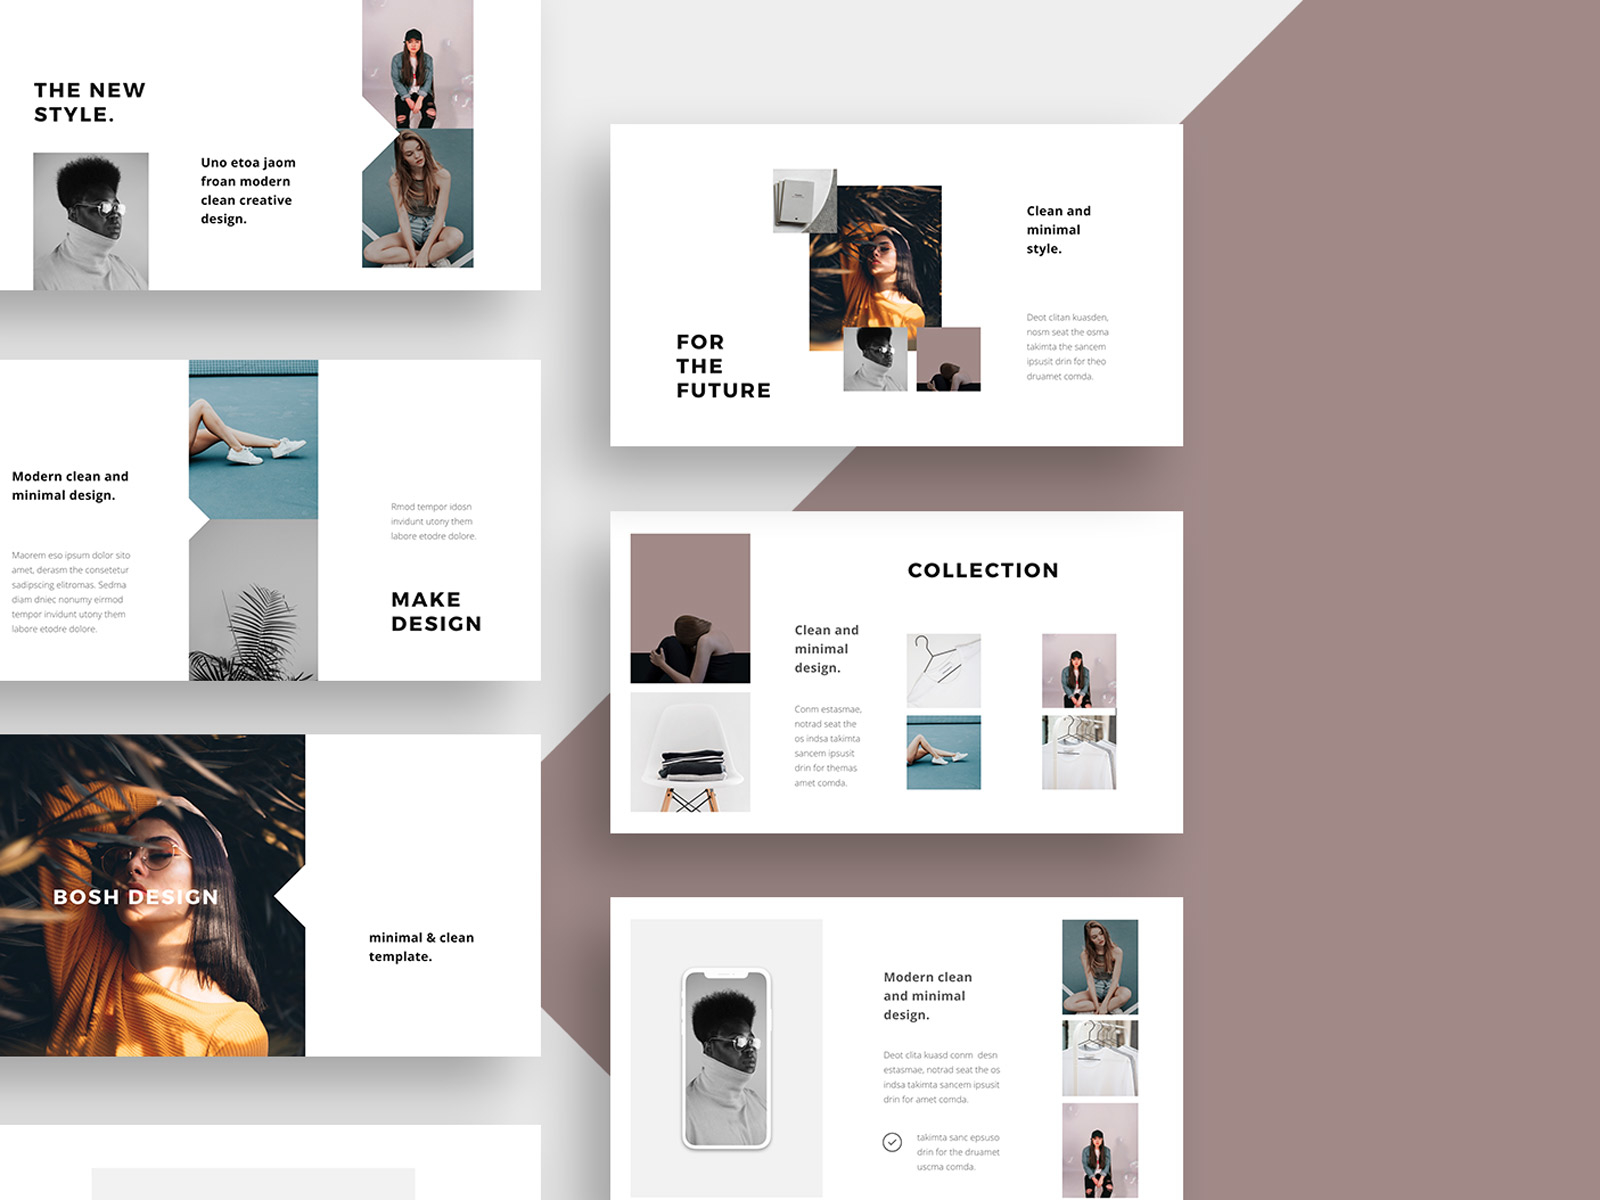 BOSH - Template Layout by Pixasquare on Dribbble